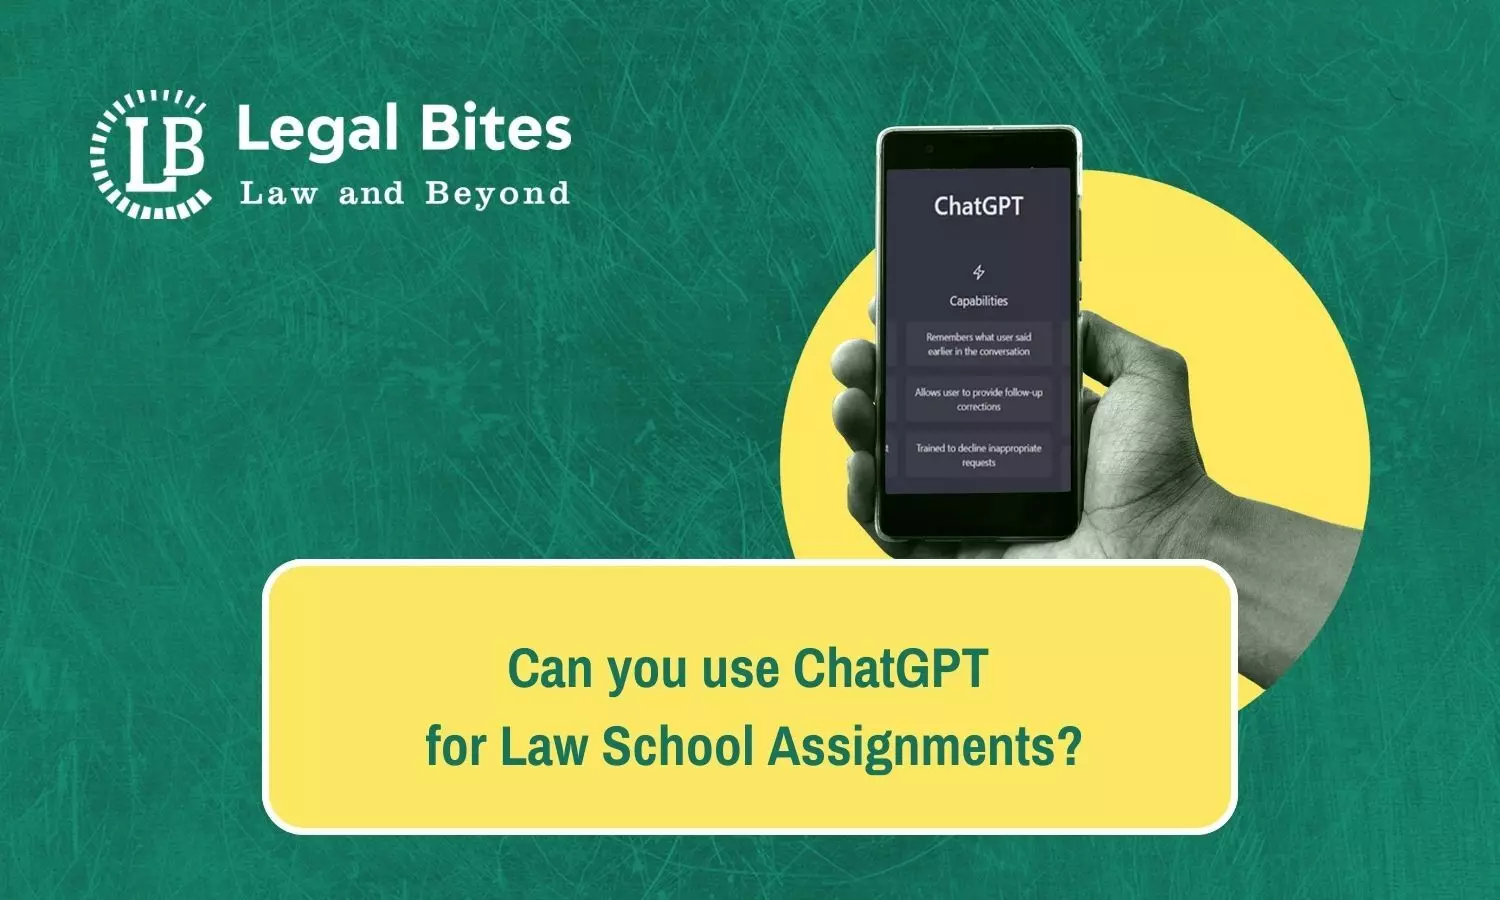 Can you use ChatGPT for Law School Assignments?